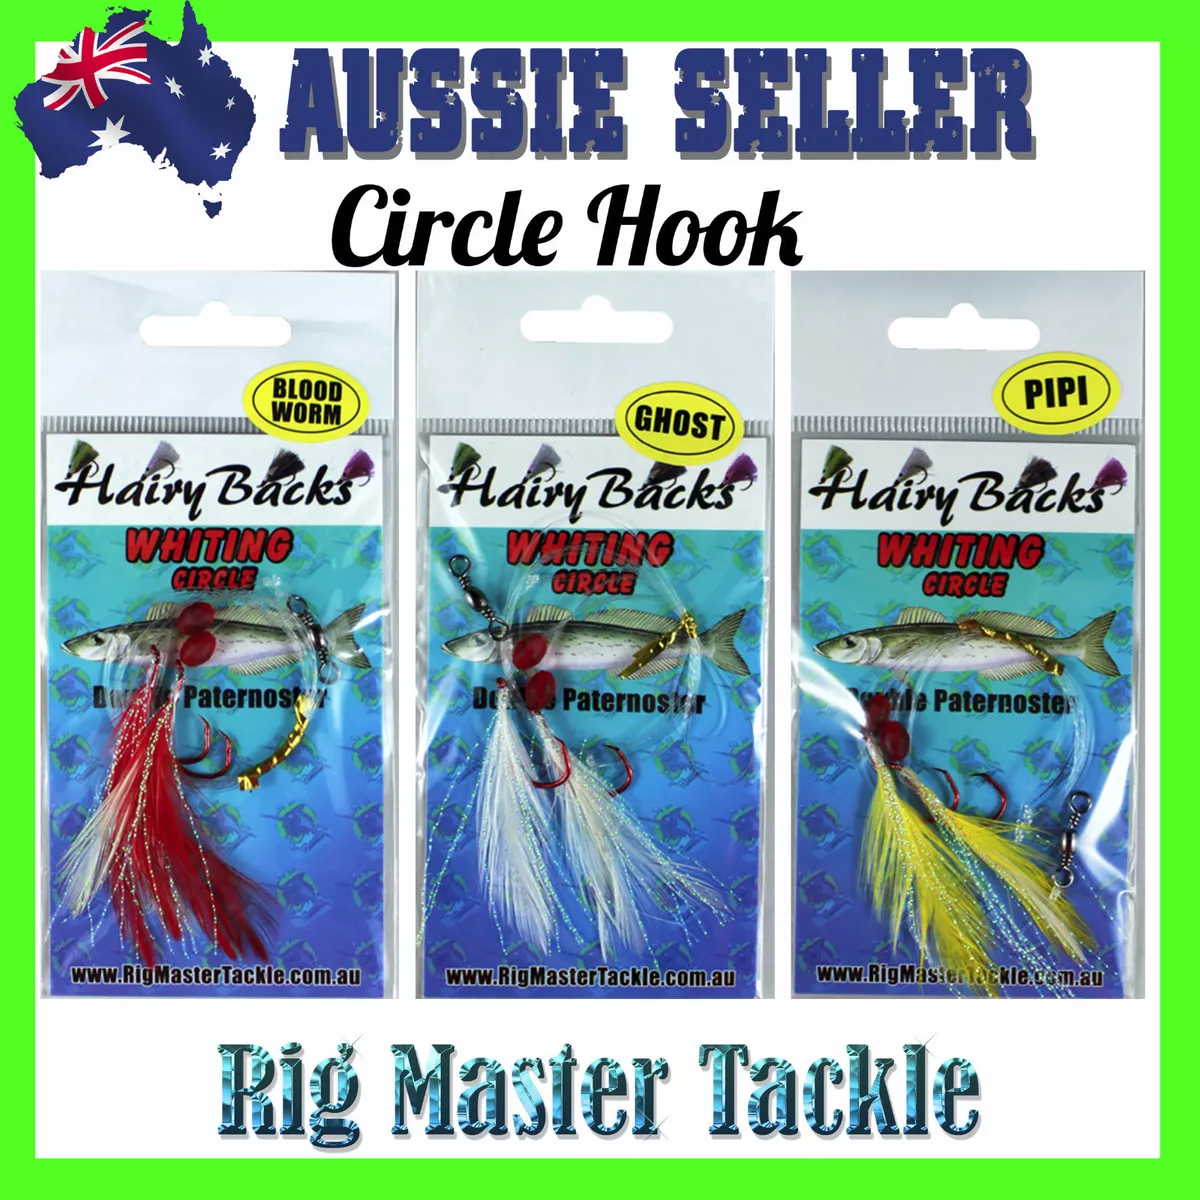 Whiting Hairy Backs Double Paternoster Pre-Made Circle Hook Rigs